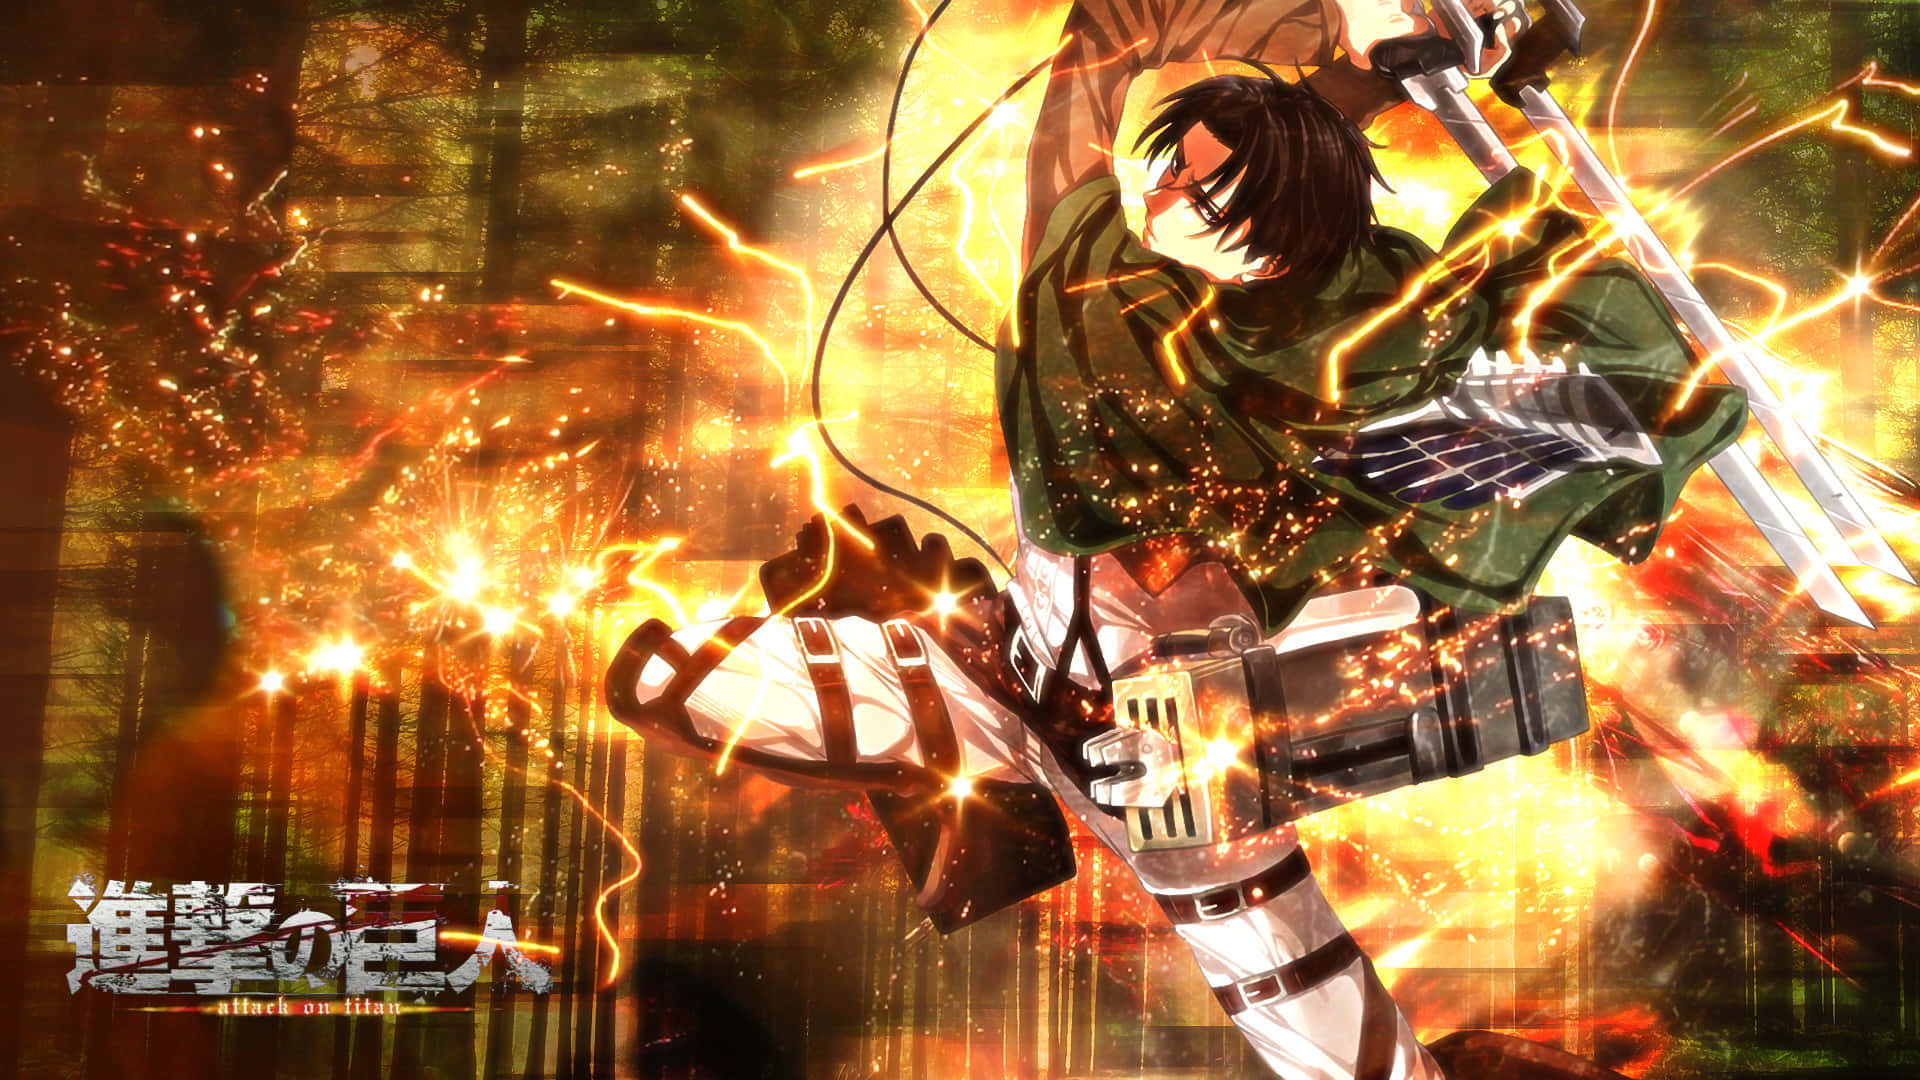 Aot Background